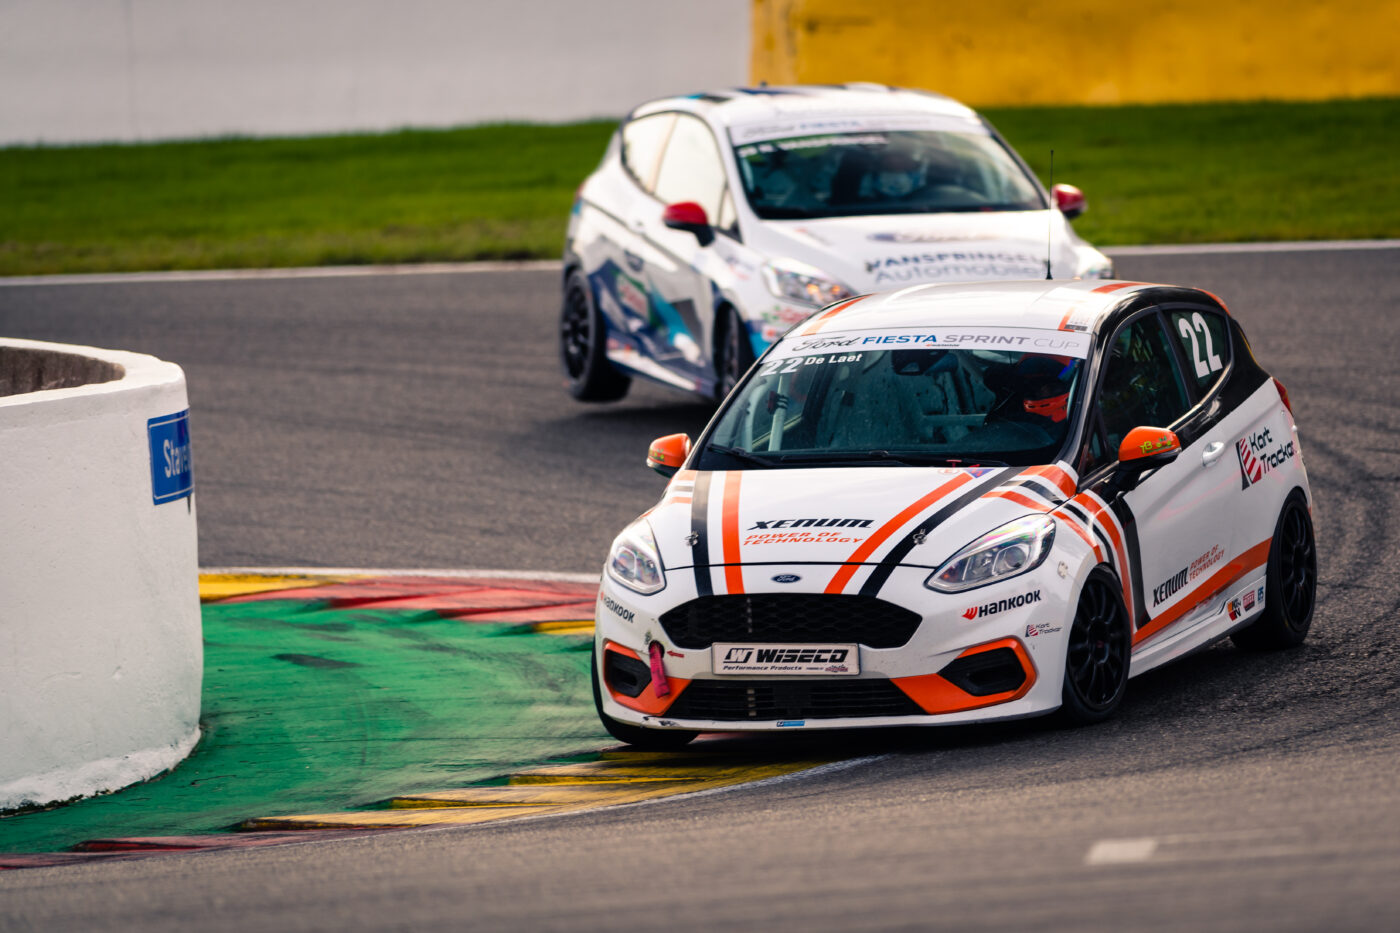 EJ Automotive to partner with Raceland29 for Ford Fiesta Sprint cup in 2022